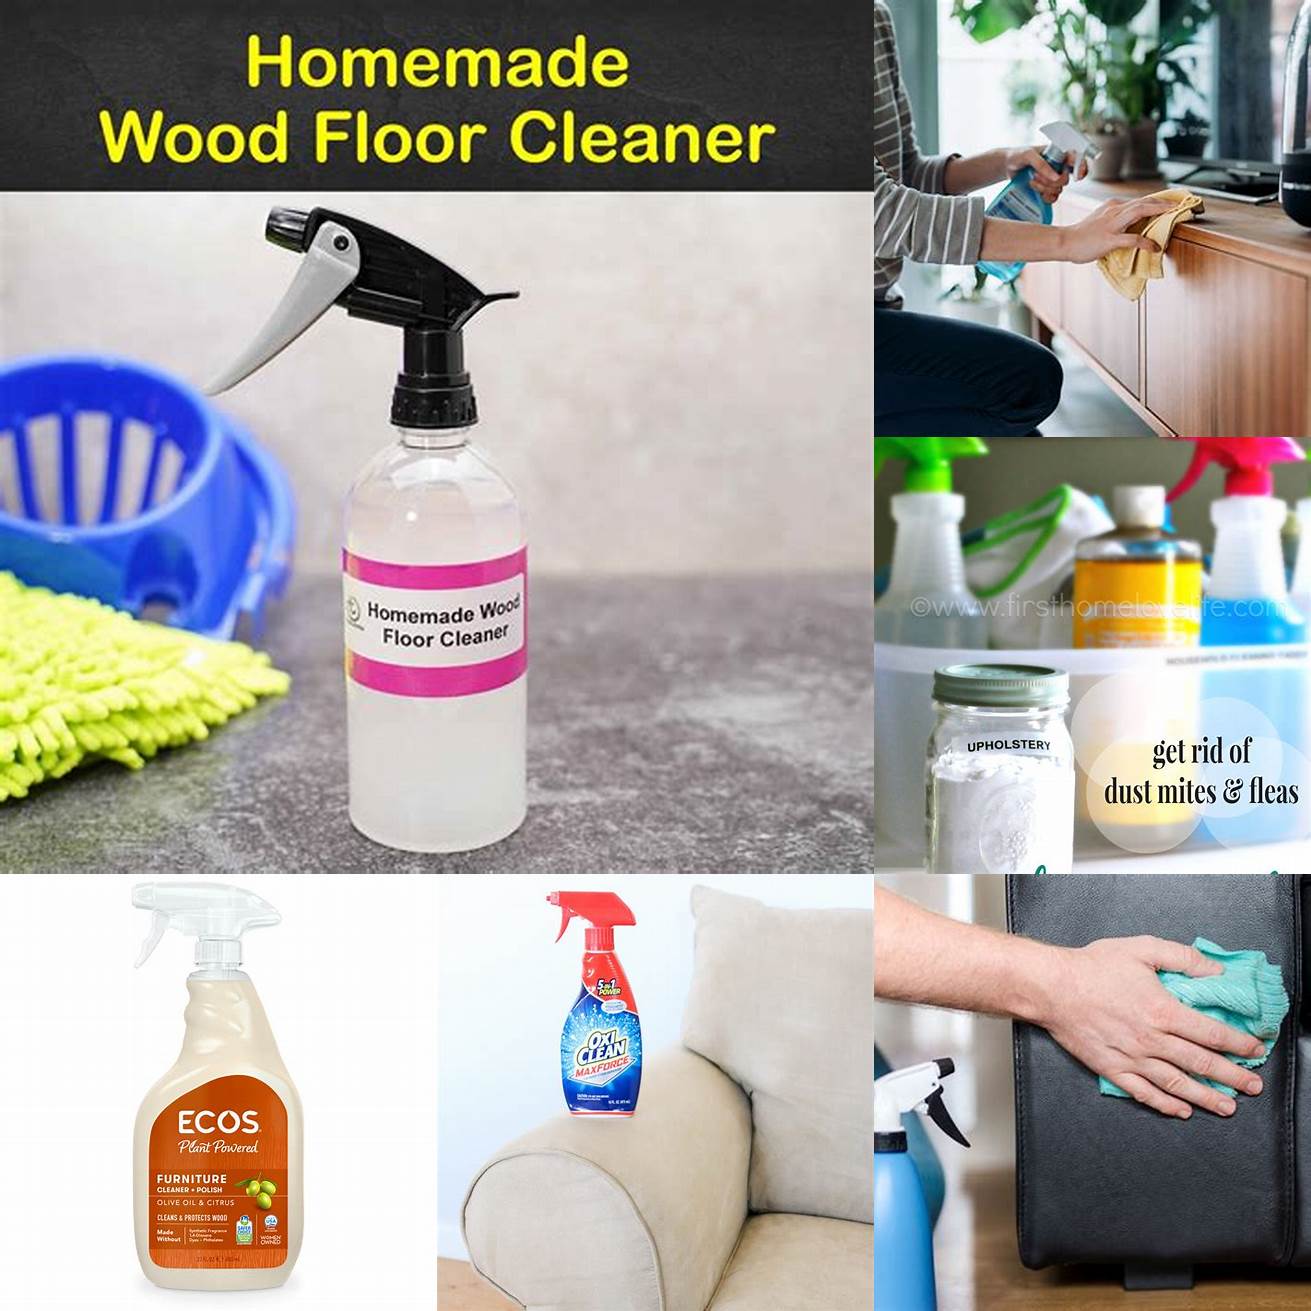 Mix a mild cleaner